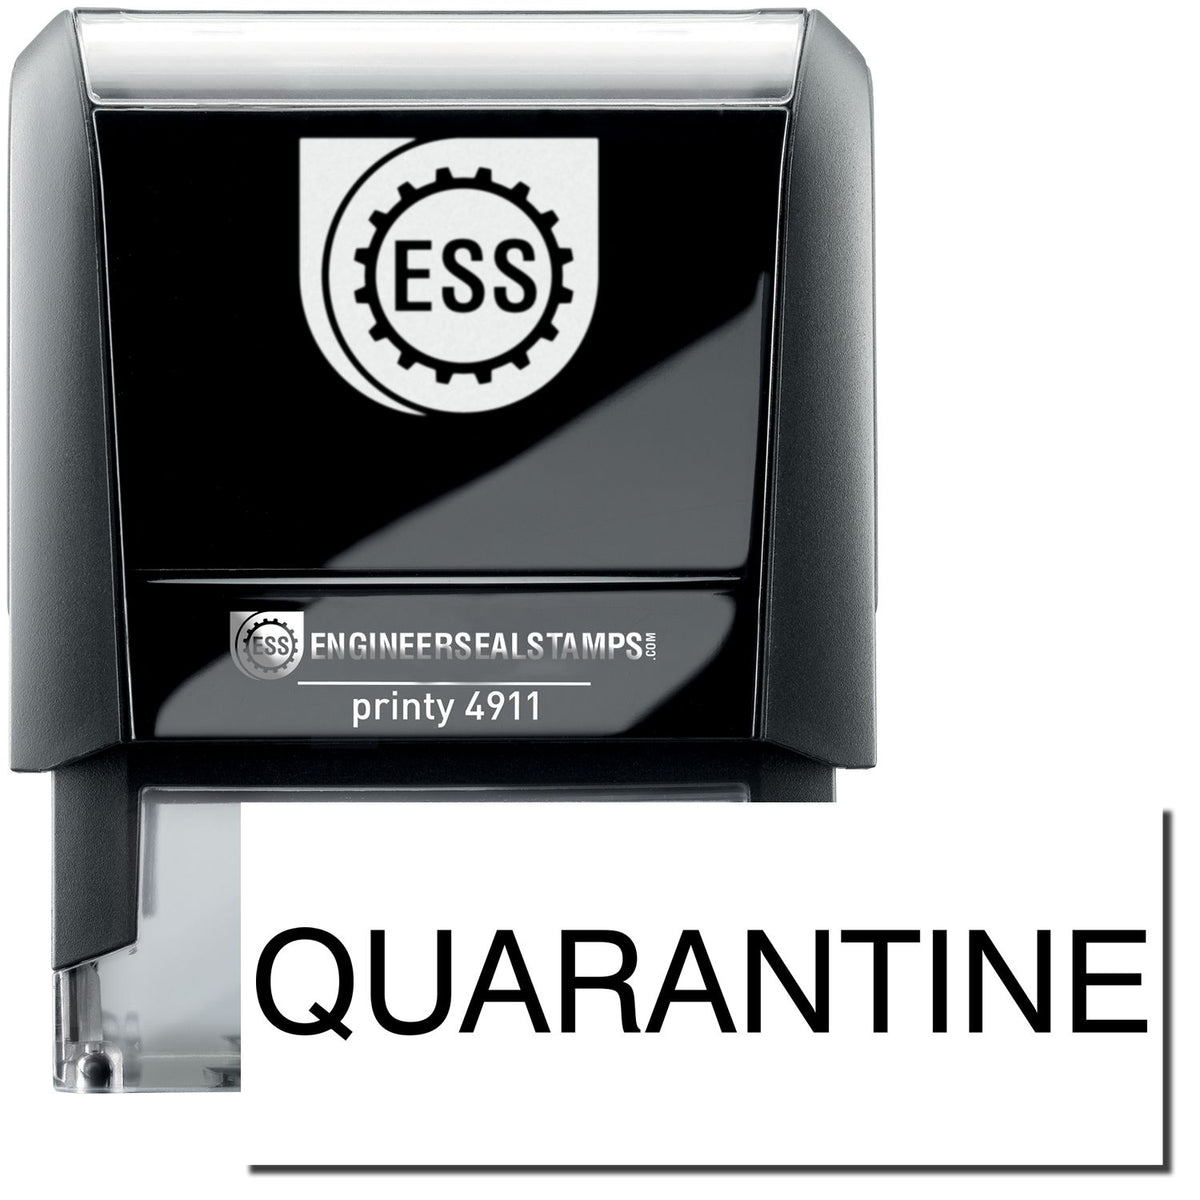 A self-inking stamp with a stamped image showing how the text &quot;QUARANTINE&quot; is displayed after stamping.